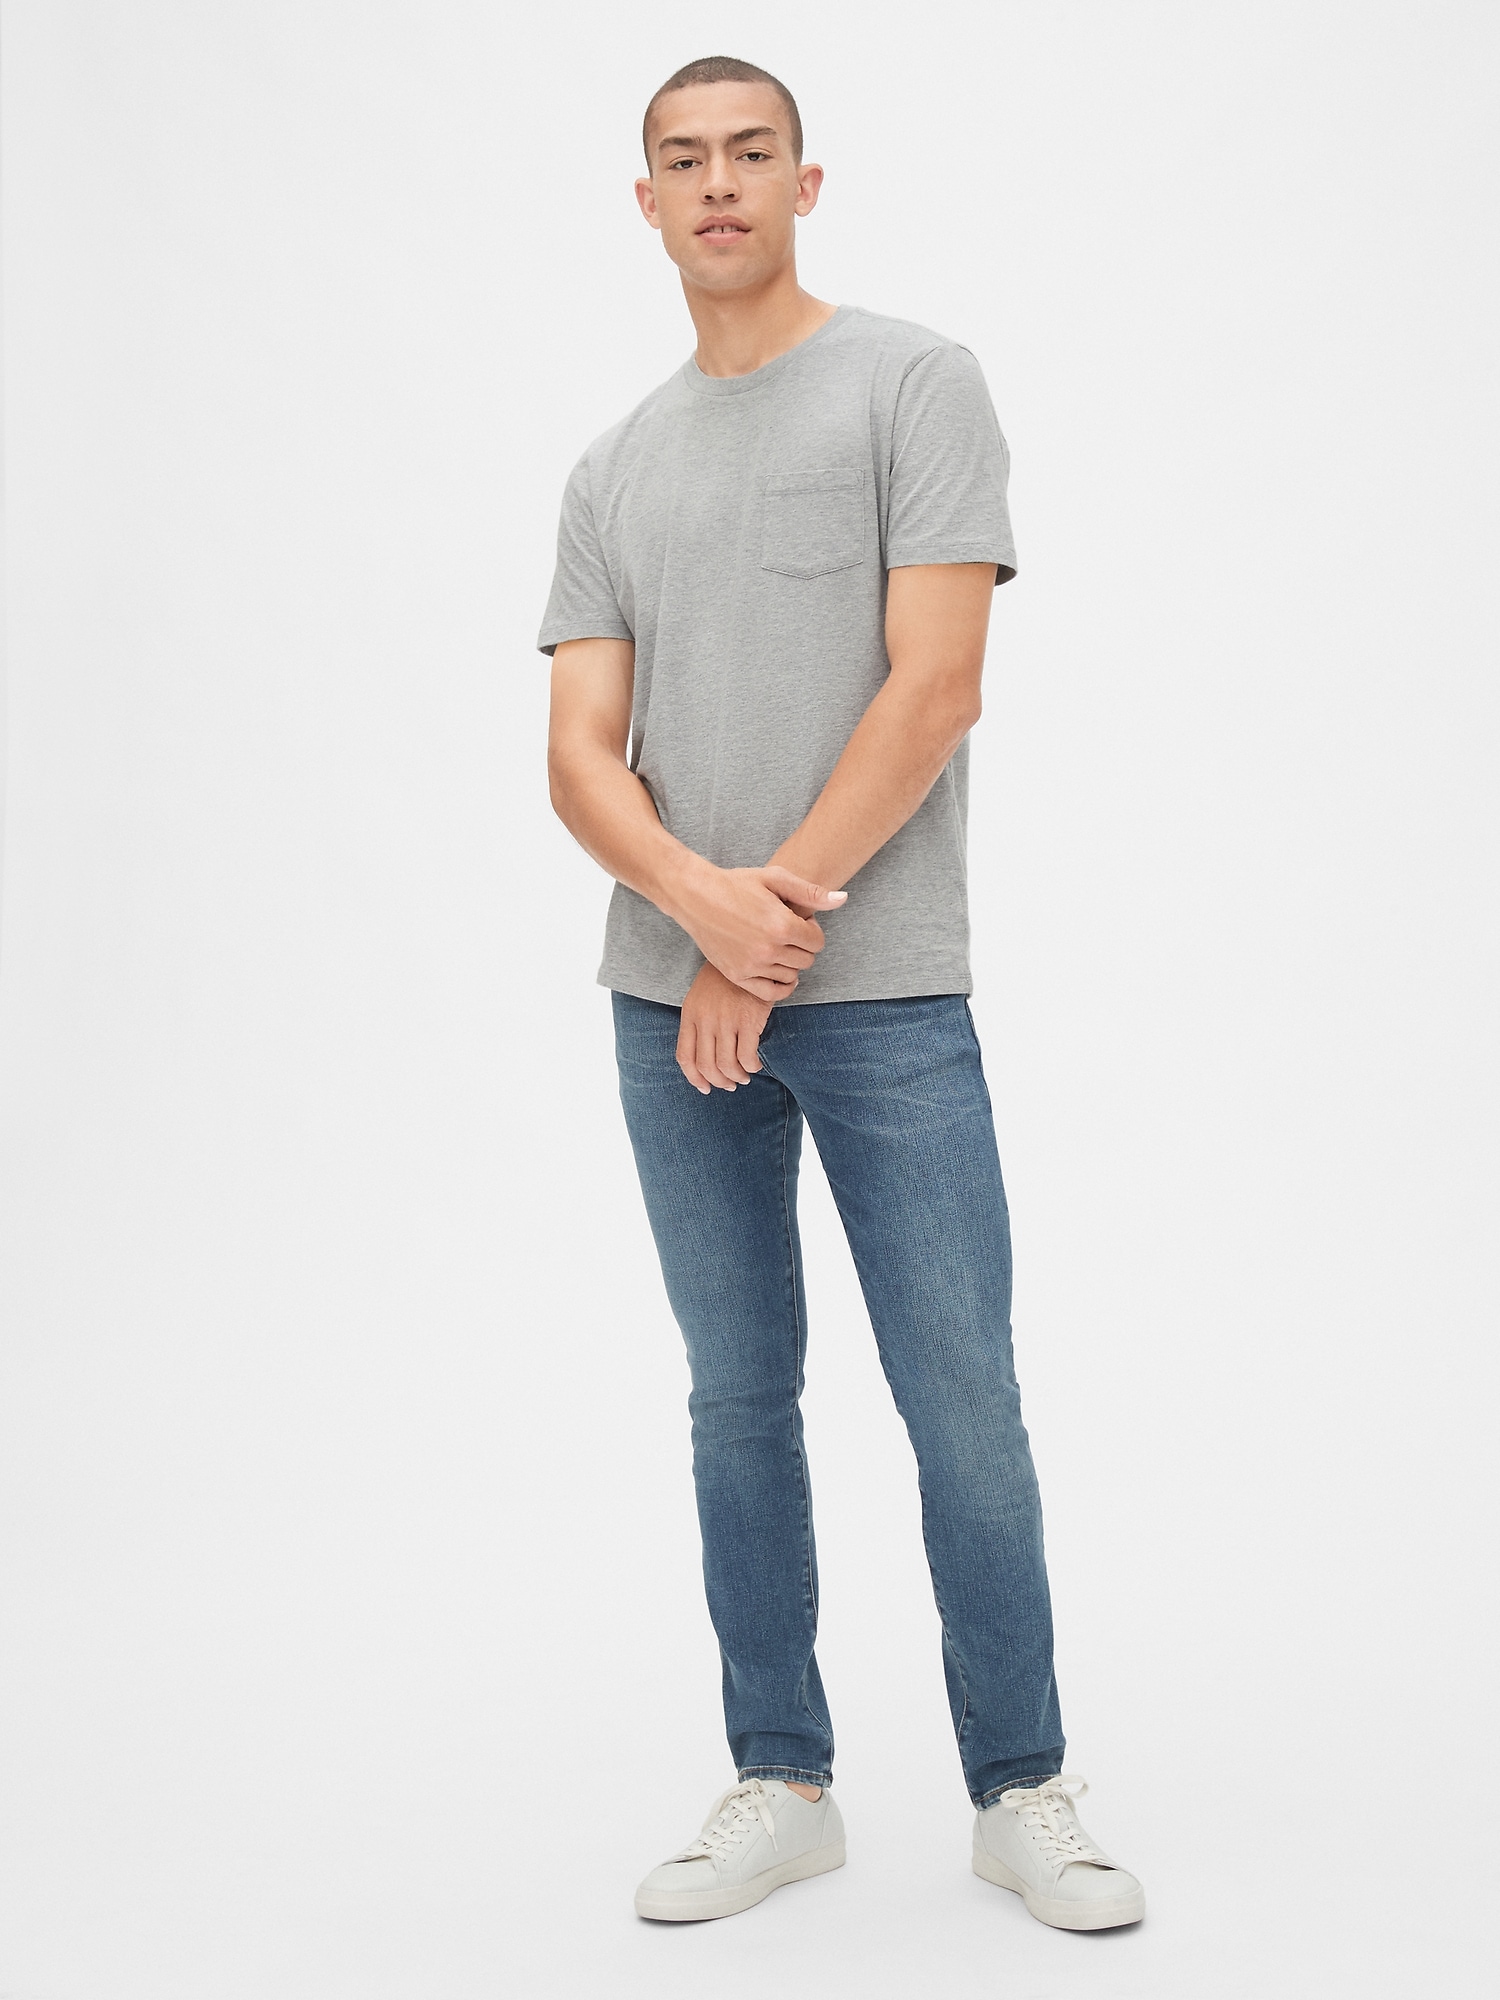 Soft Wear Skinny Jeans With Washwell™